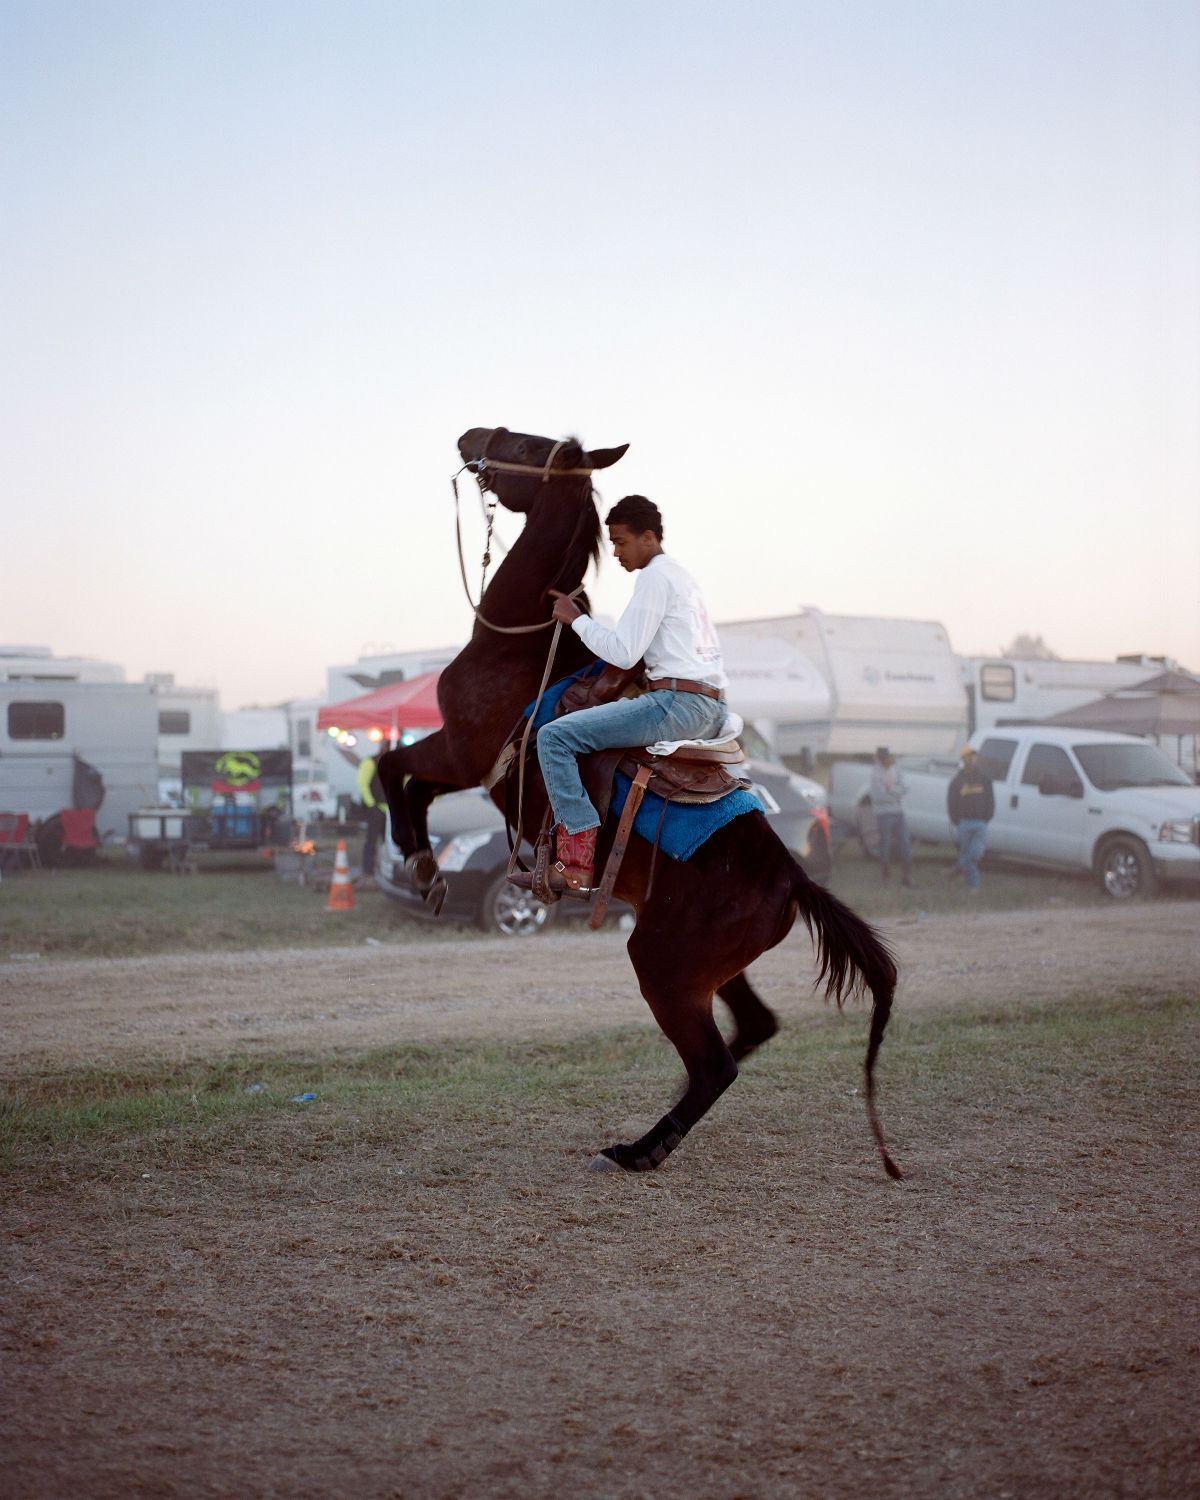 "This is a photo from a body of work about urban horse riders. I